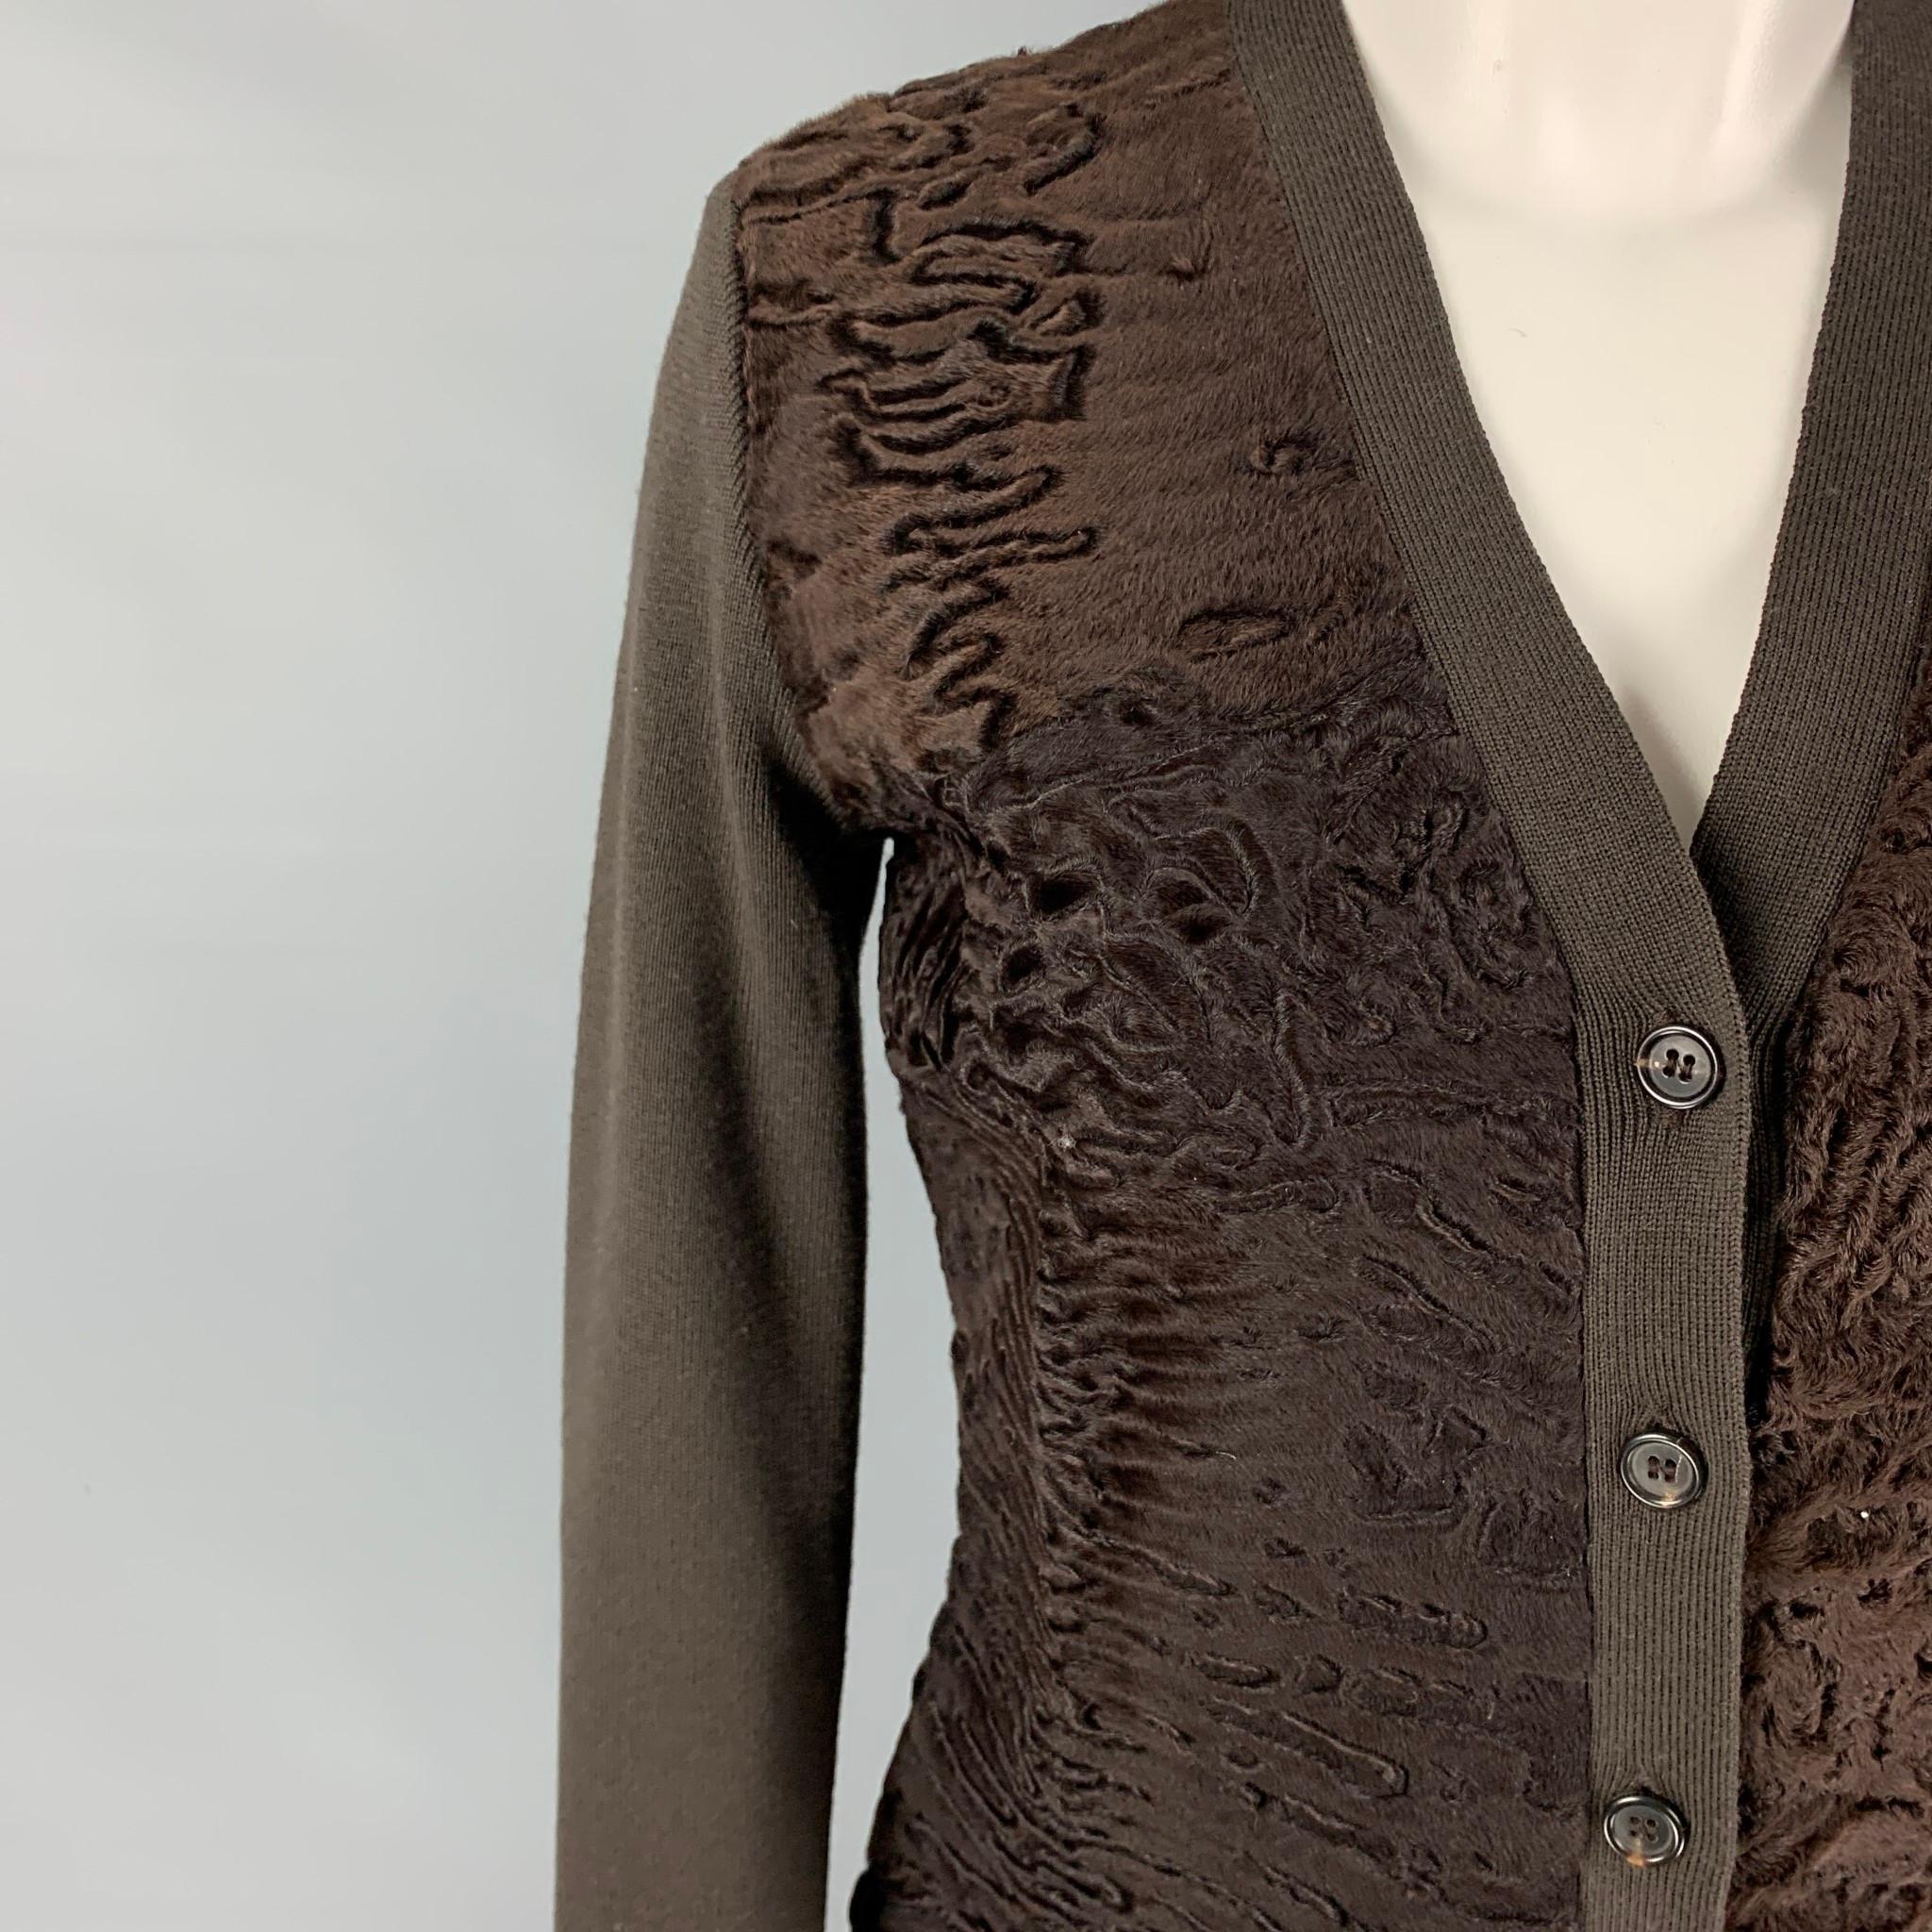 PRADA cardigan comes in a brown knitted wool featuring a lamb fur panel design and a buttoned closure. Made in Italy. 

Excellent Pre-Owned Condition.
Marked: 40

Measurements:

Shoulder: 15 in.
Bust: 32 in.
Sleeve: 23 in.
Length: 21 in.